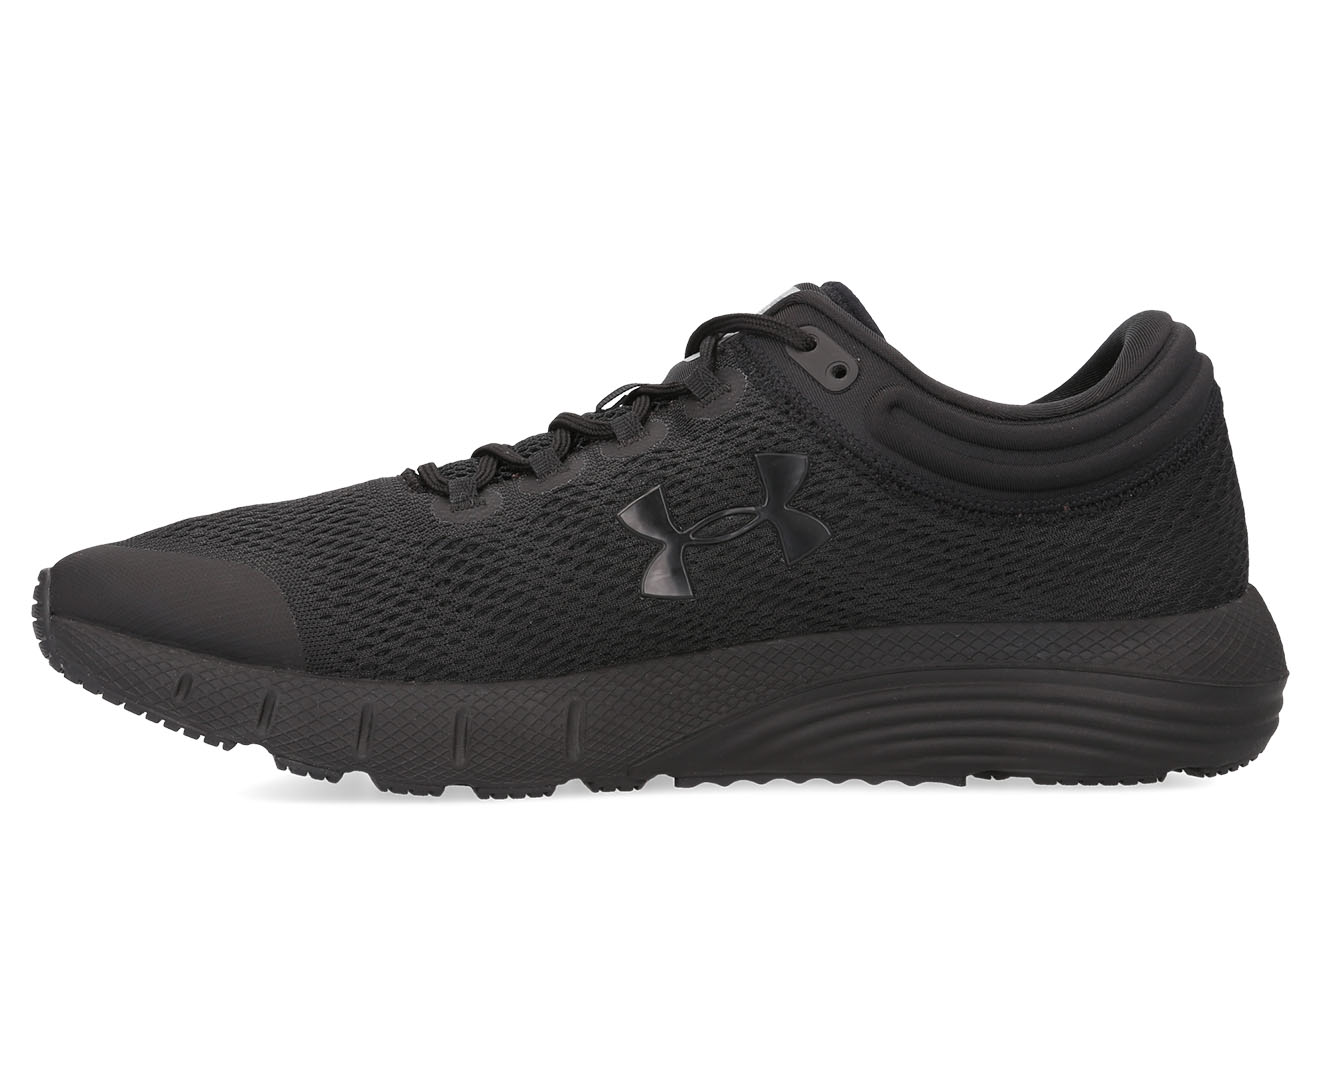 Under Armour Men's UA Charged Bandit 5 Running Shoes - Black | Catch.co.nz